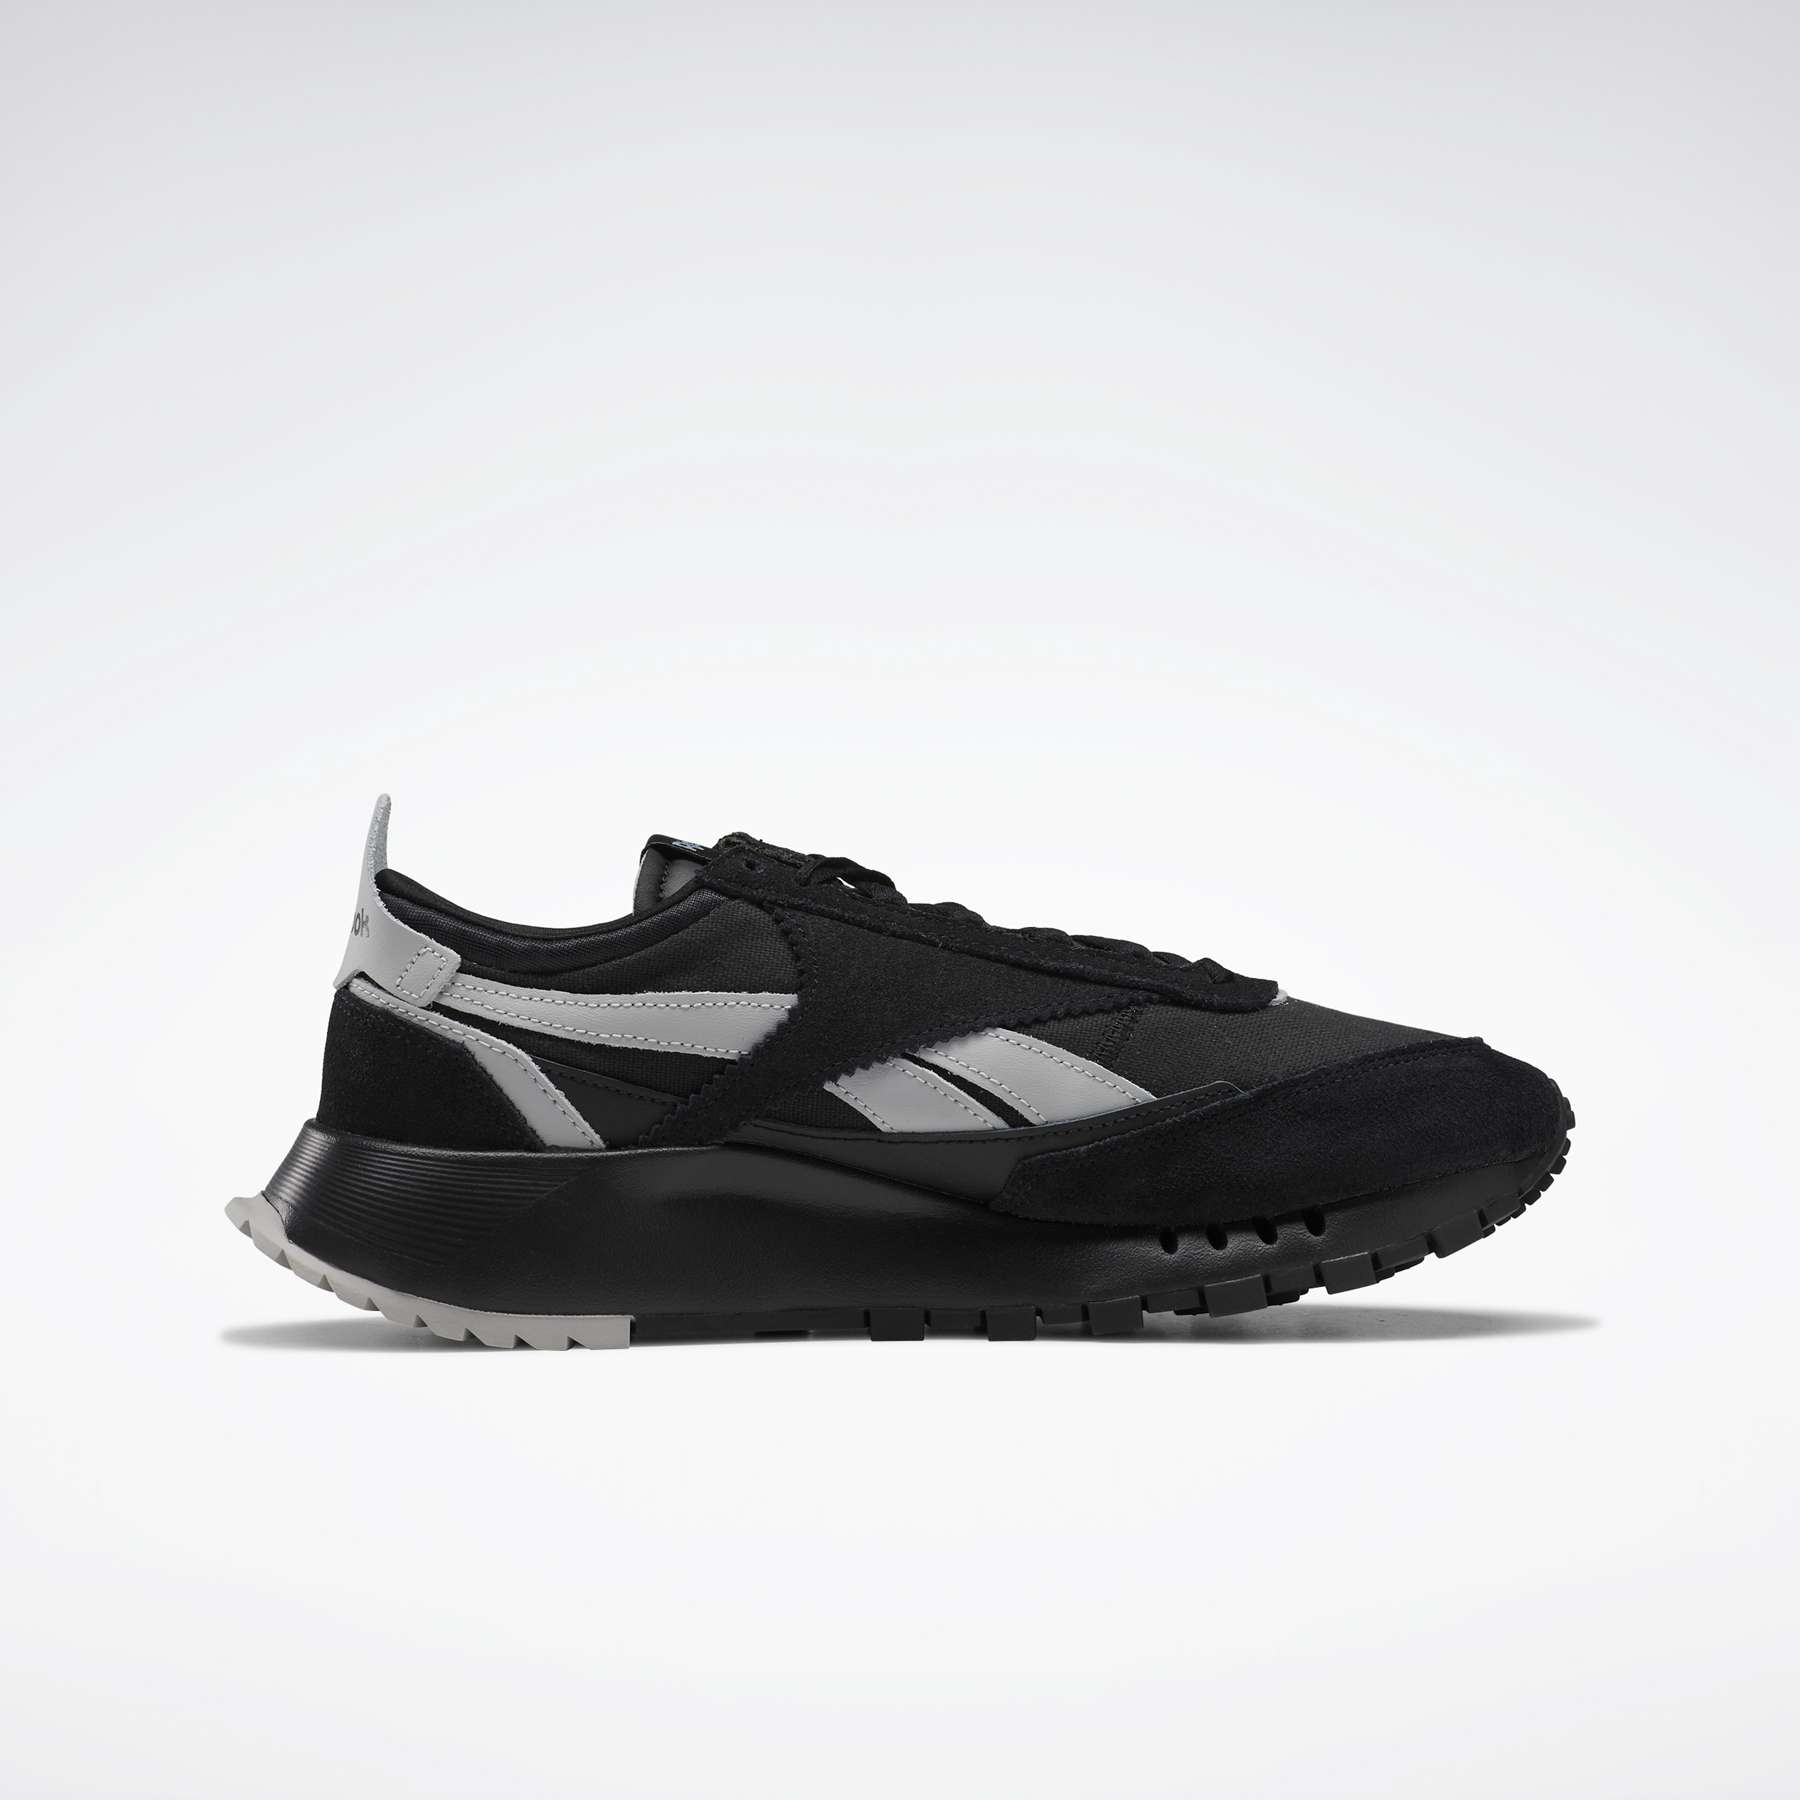 Reebok Classic Leather Legacy Gore-Tex Shoes